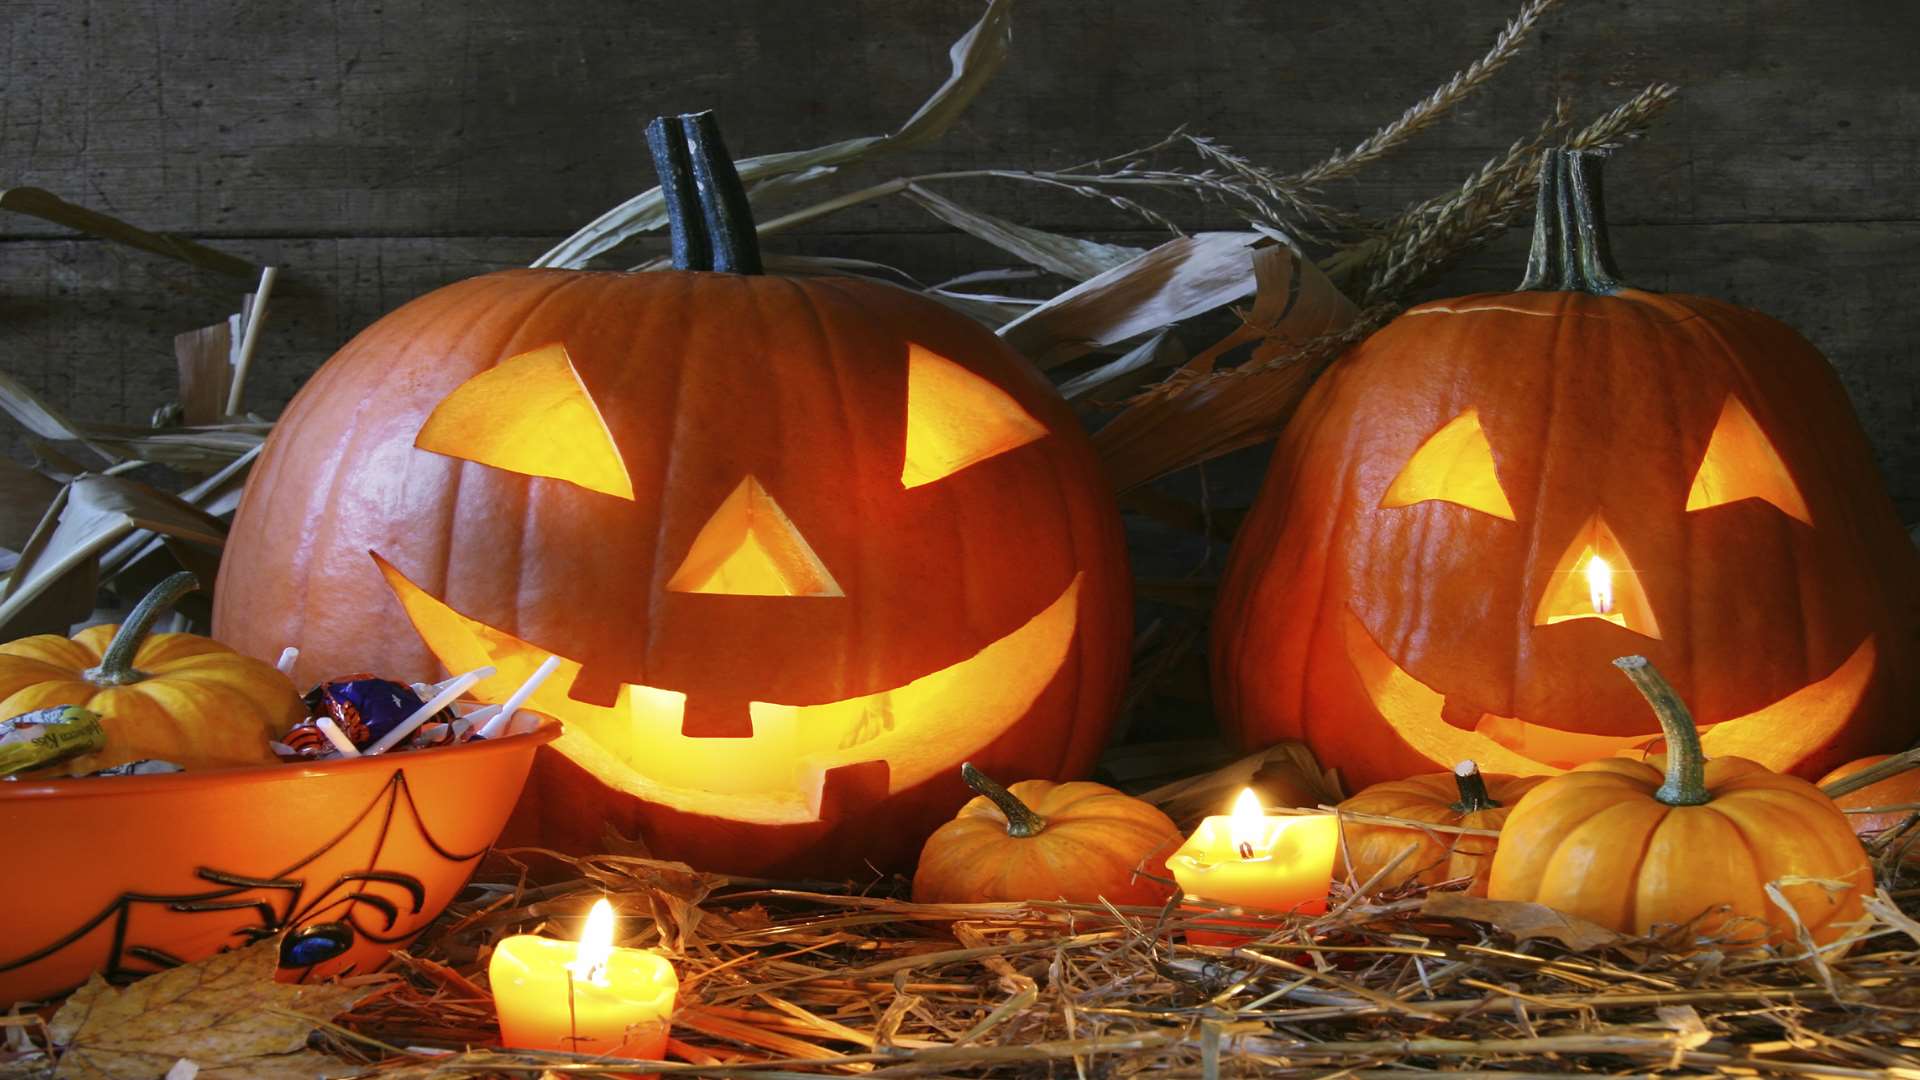 Family Halloween Events In Kent